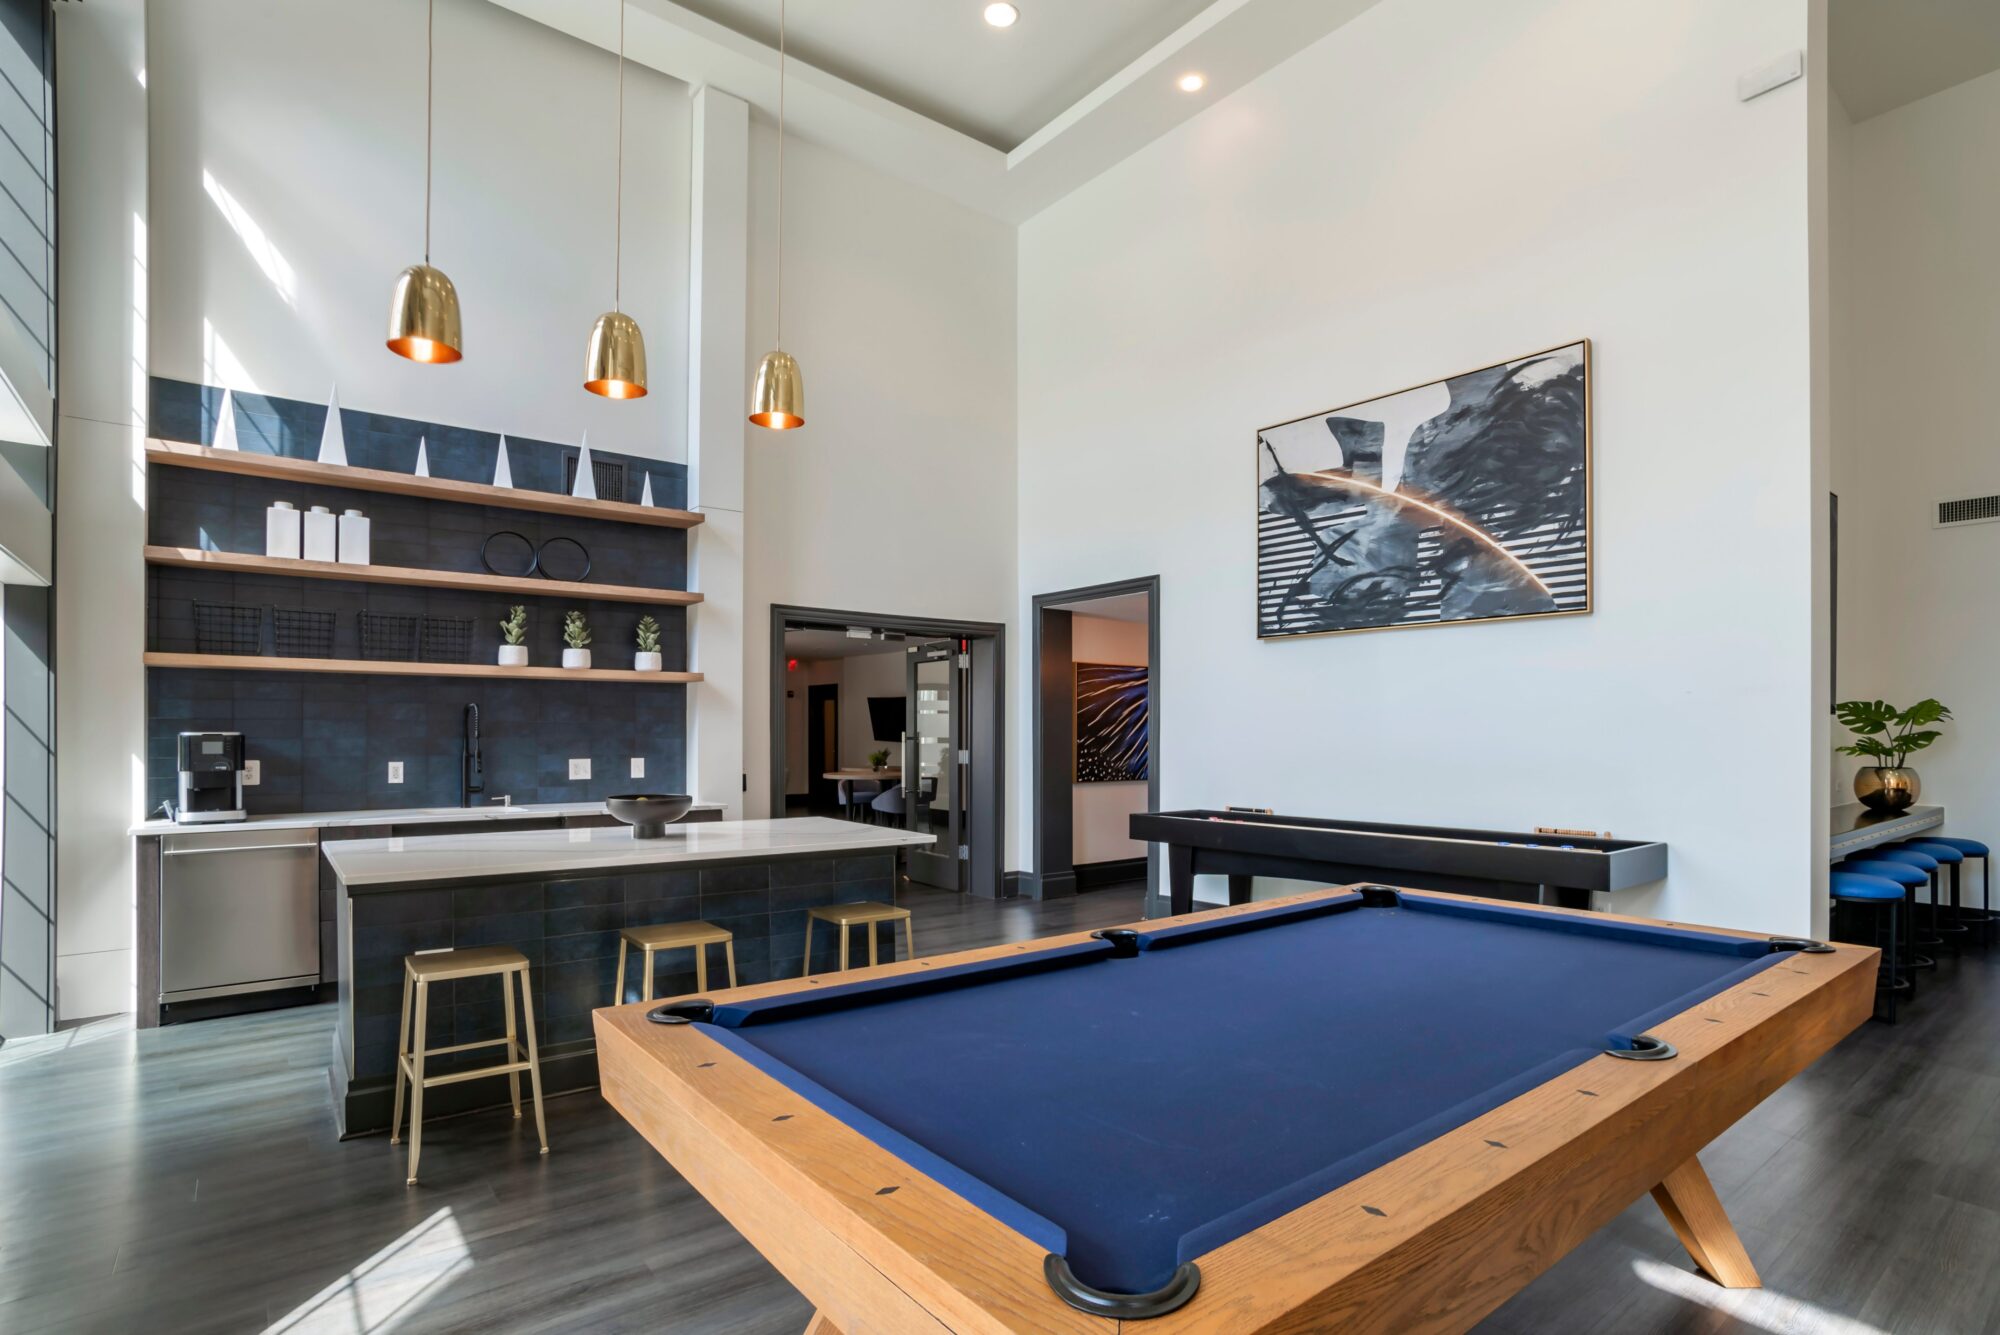 Clubhouse room with a kitchenette, coffee machine, dishwasher, billiards, bar seating, and shuffleboard